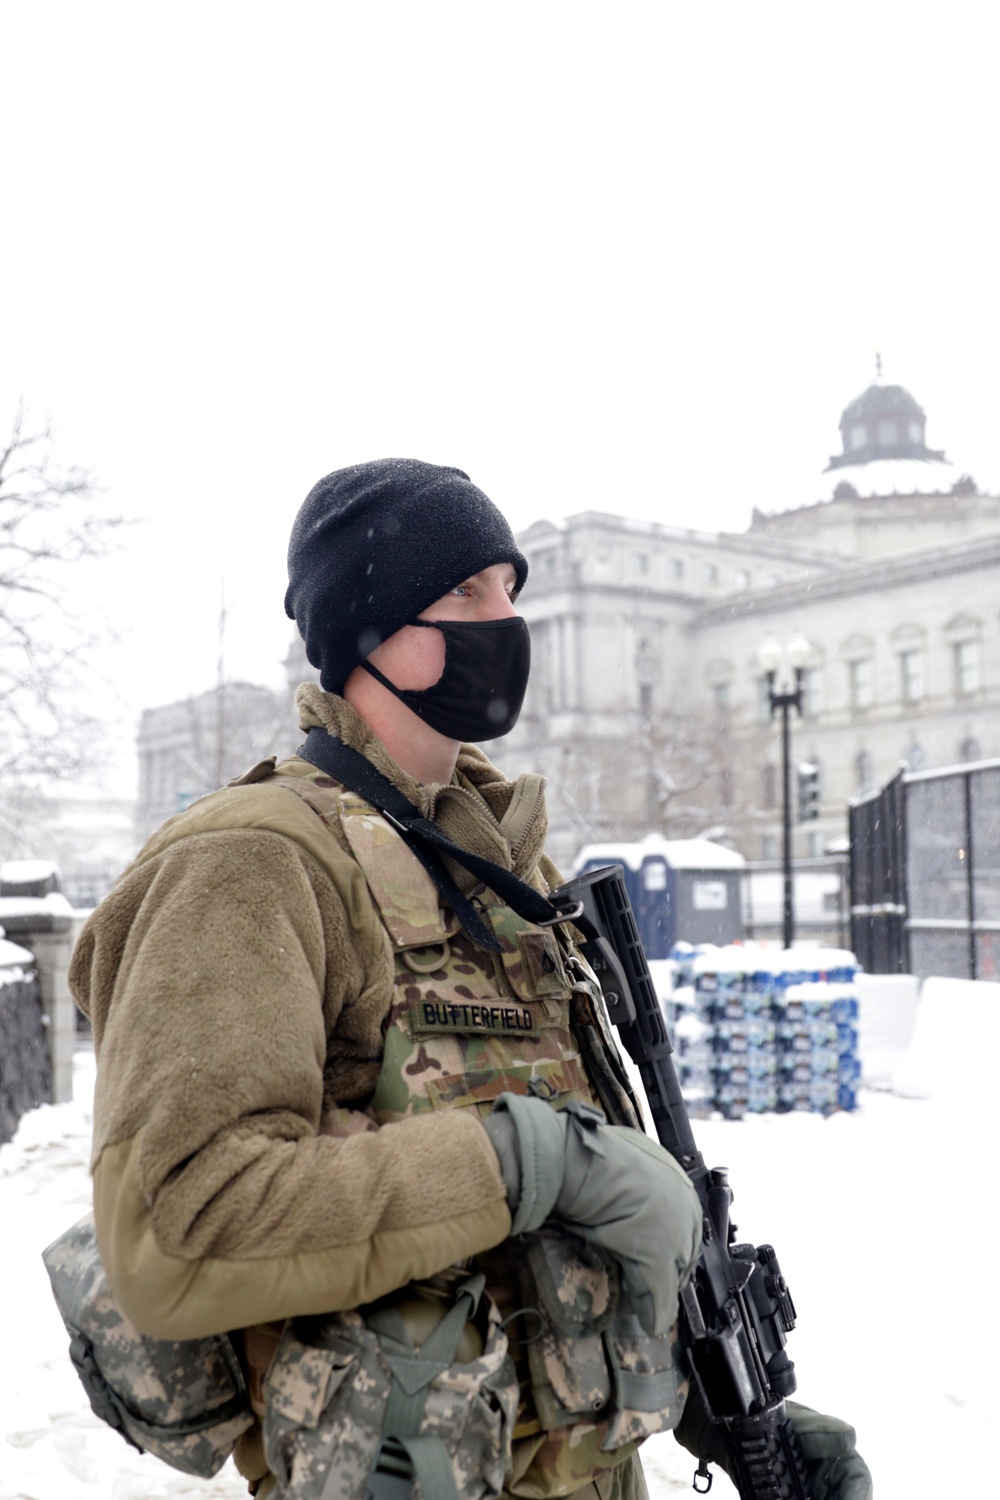 Guard Soldiers Work a Snowy Day at the US Capitol